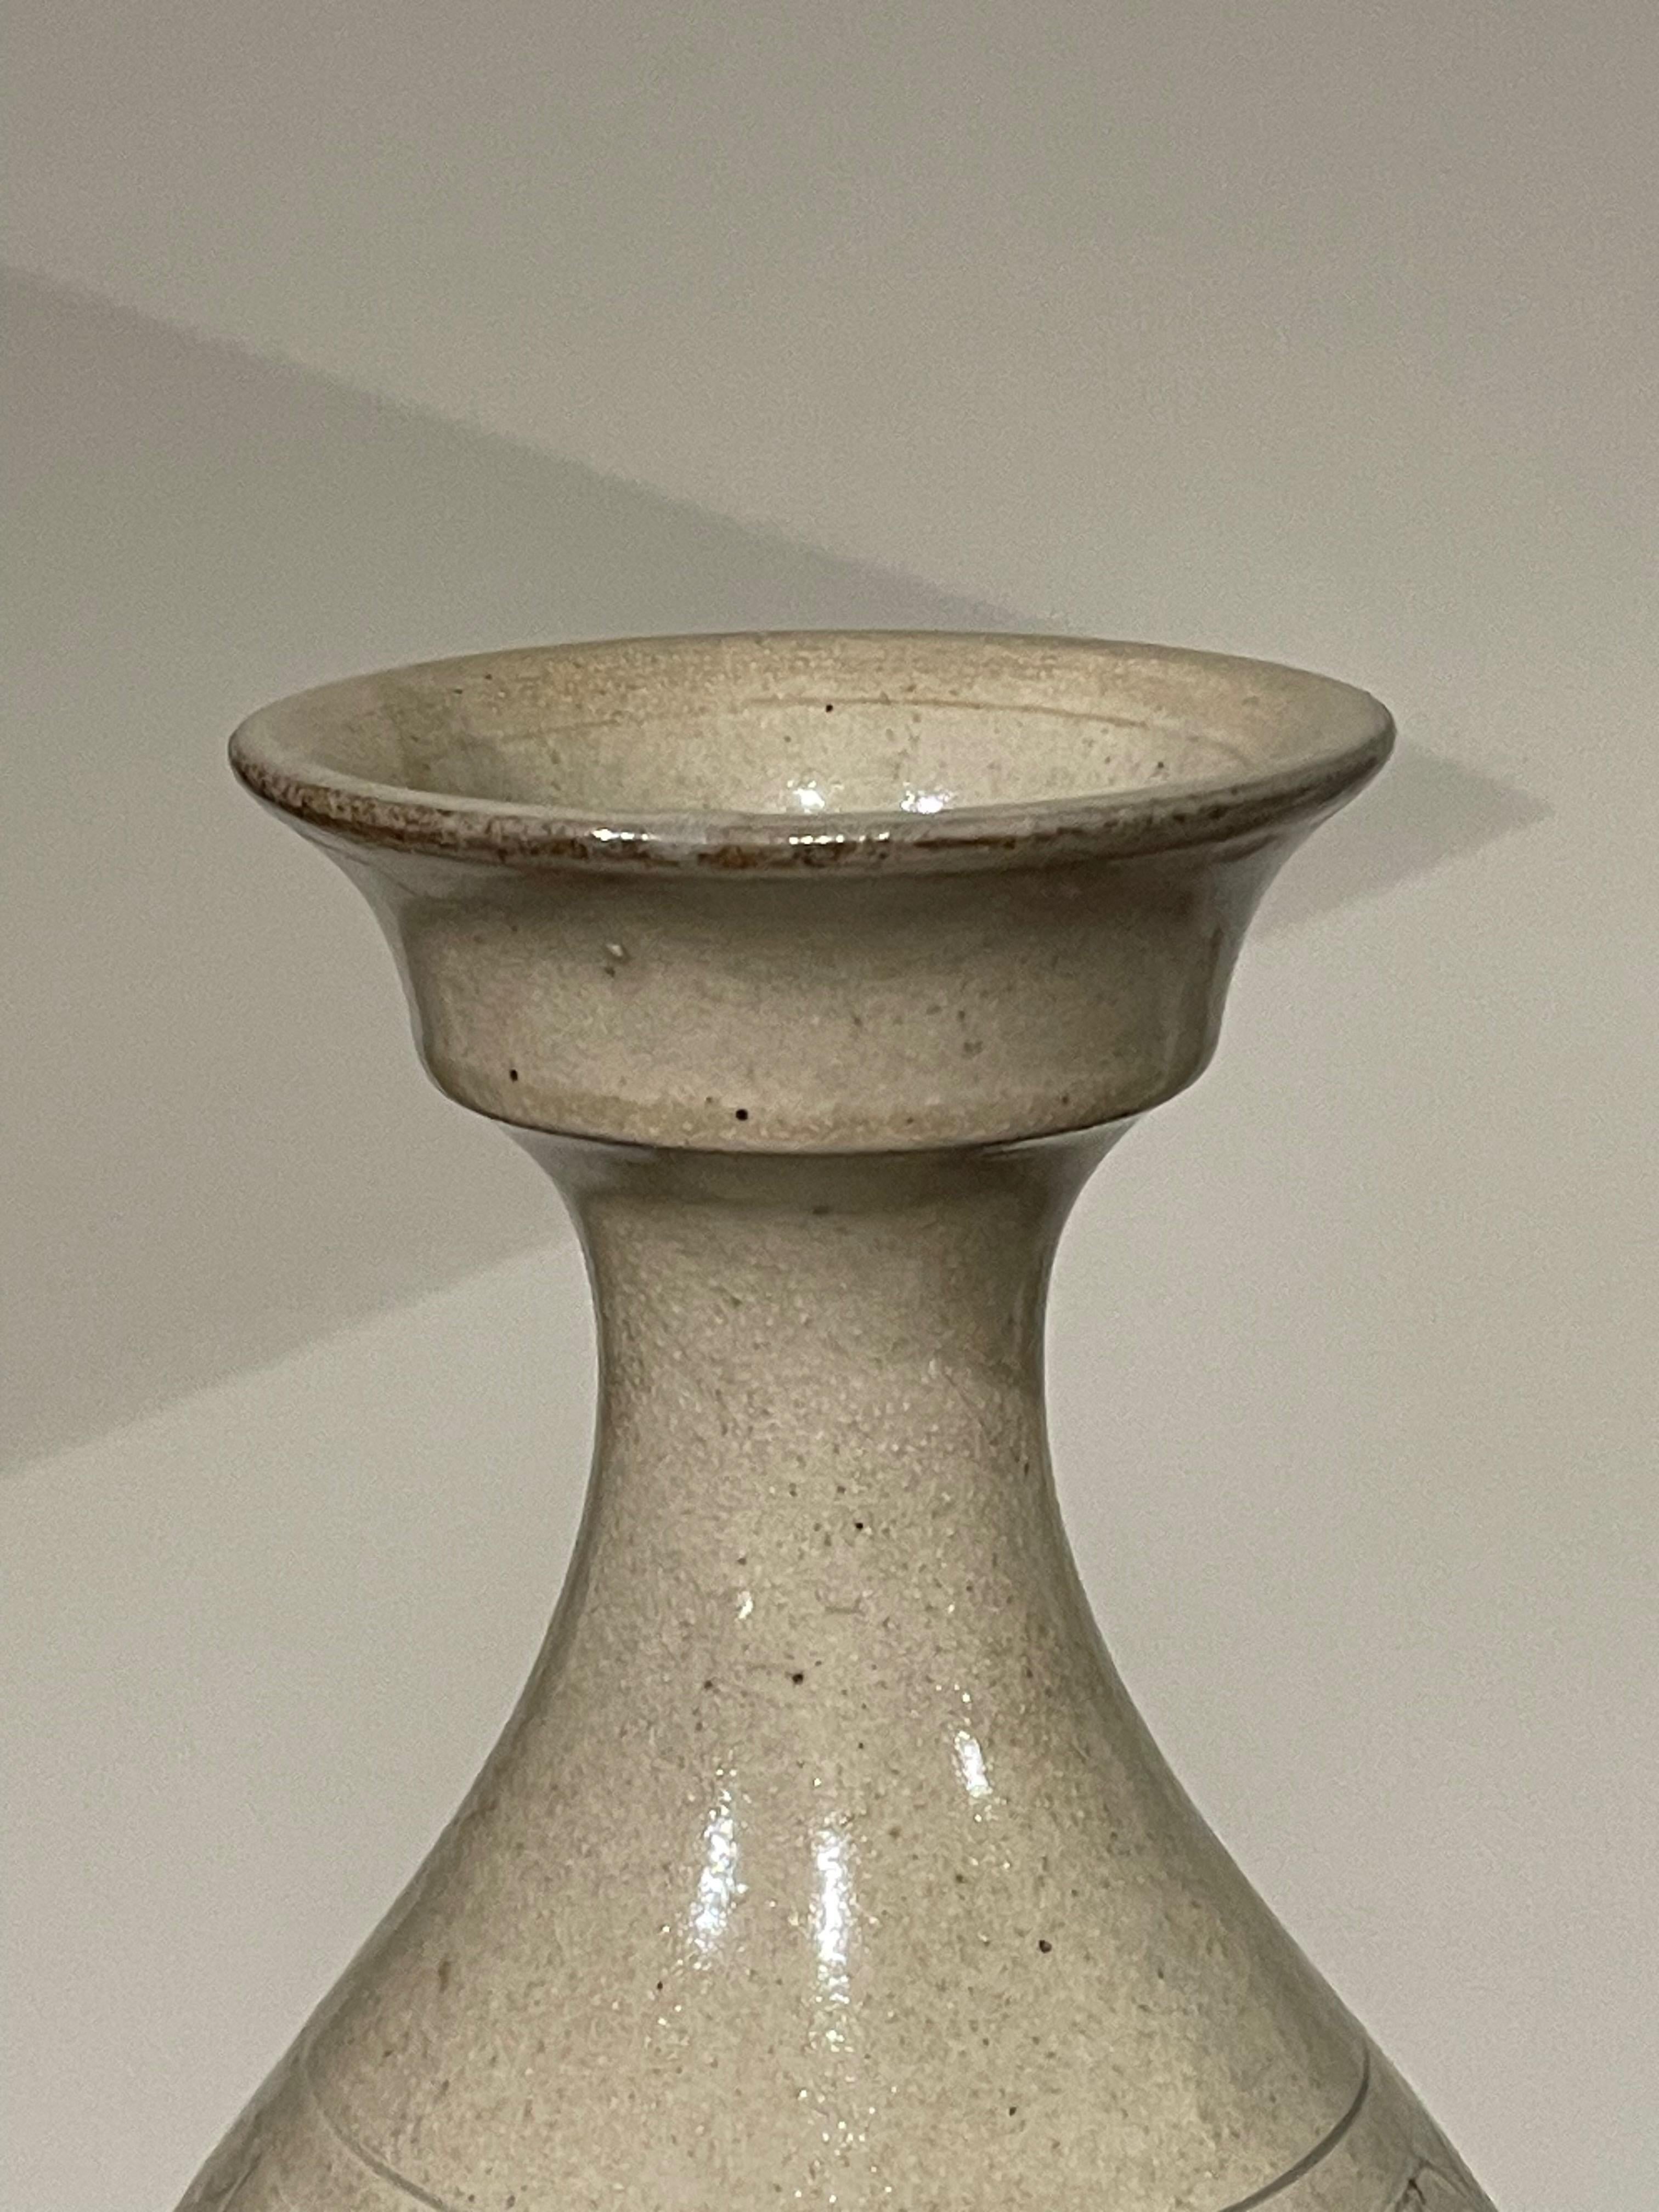 Contemporary Chinese patterned cream vase.
Cup shaped top.
Horizontal bands of circular decorative pattern.
Two available and sold individually.
Collection of six with different shapes available.
